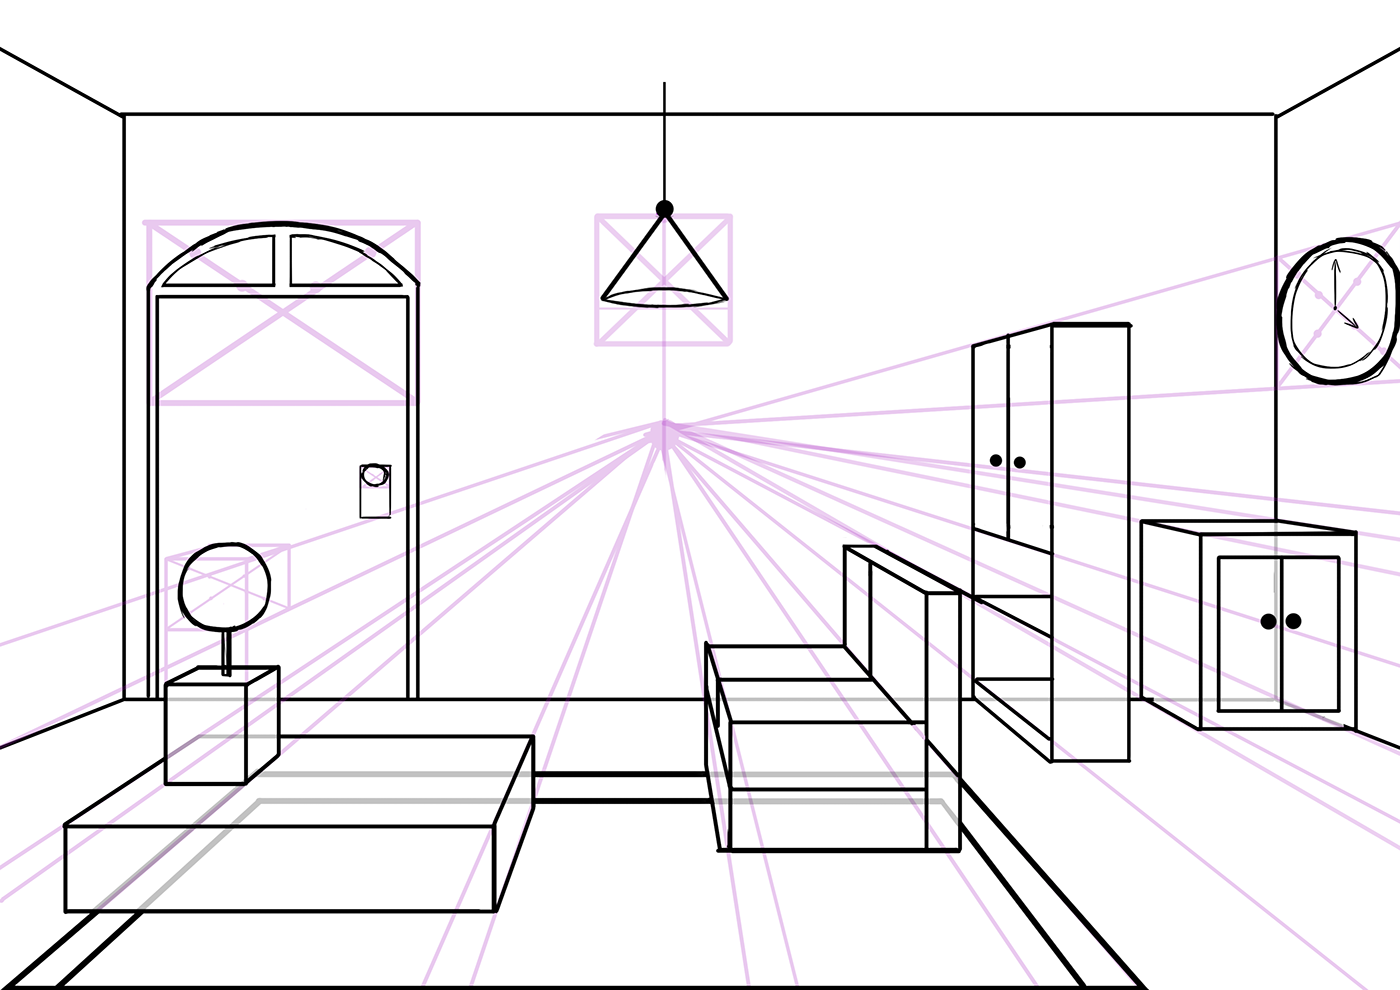 Two point perspective drawing of a room - 65 photo